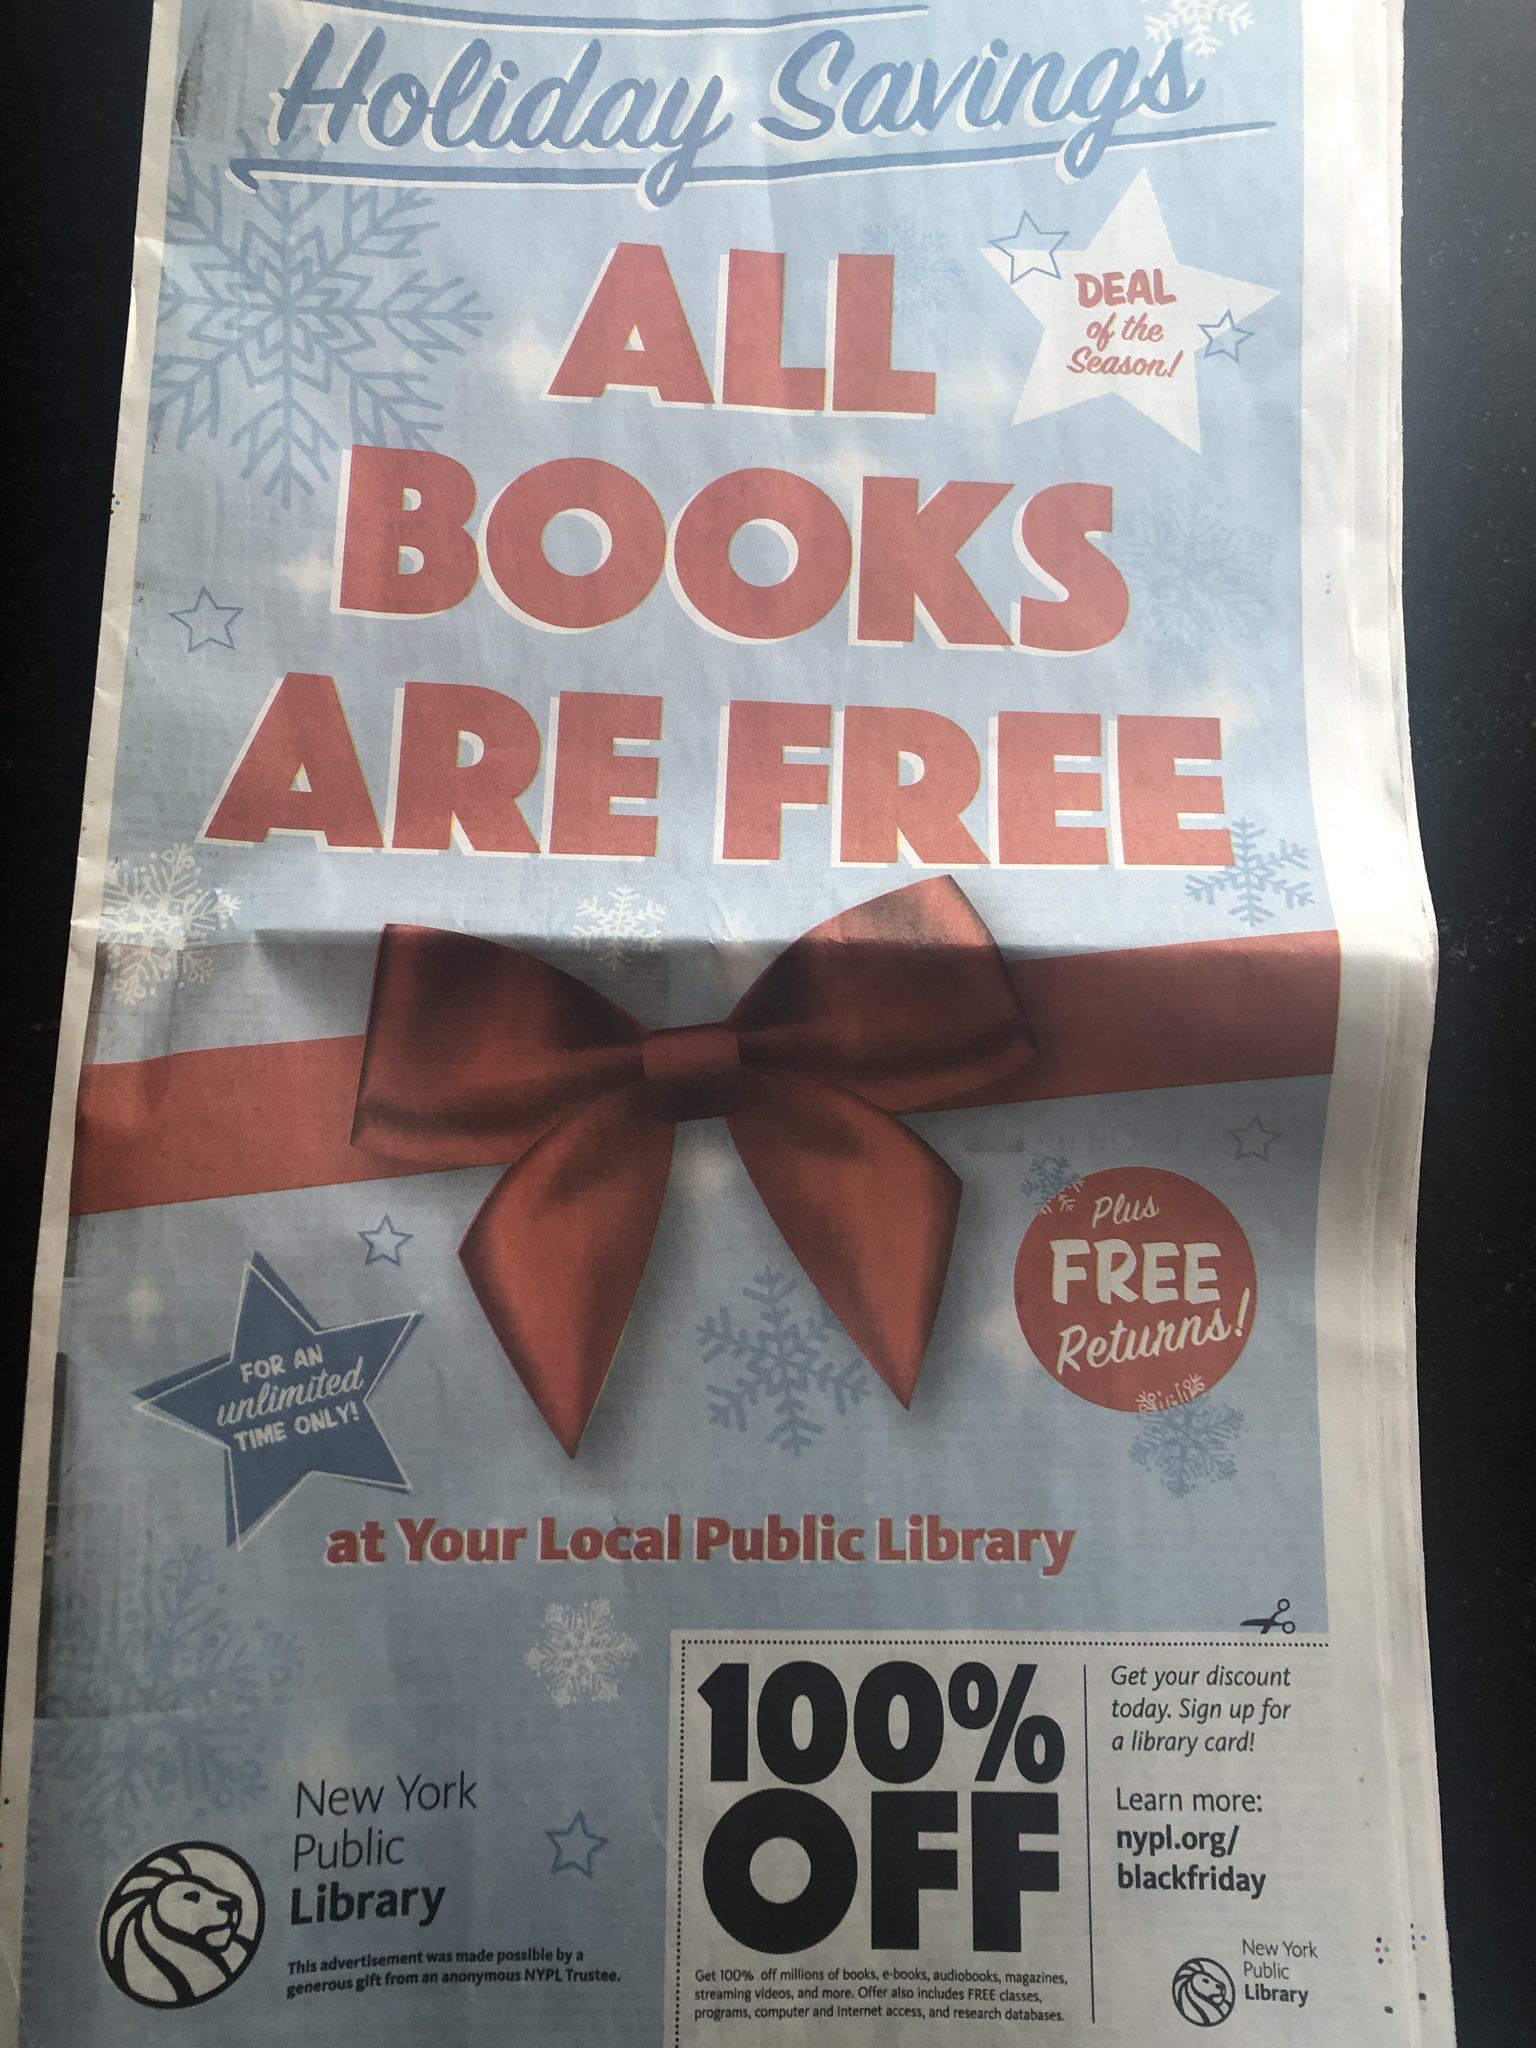 This advertisement for a library.